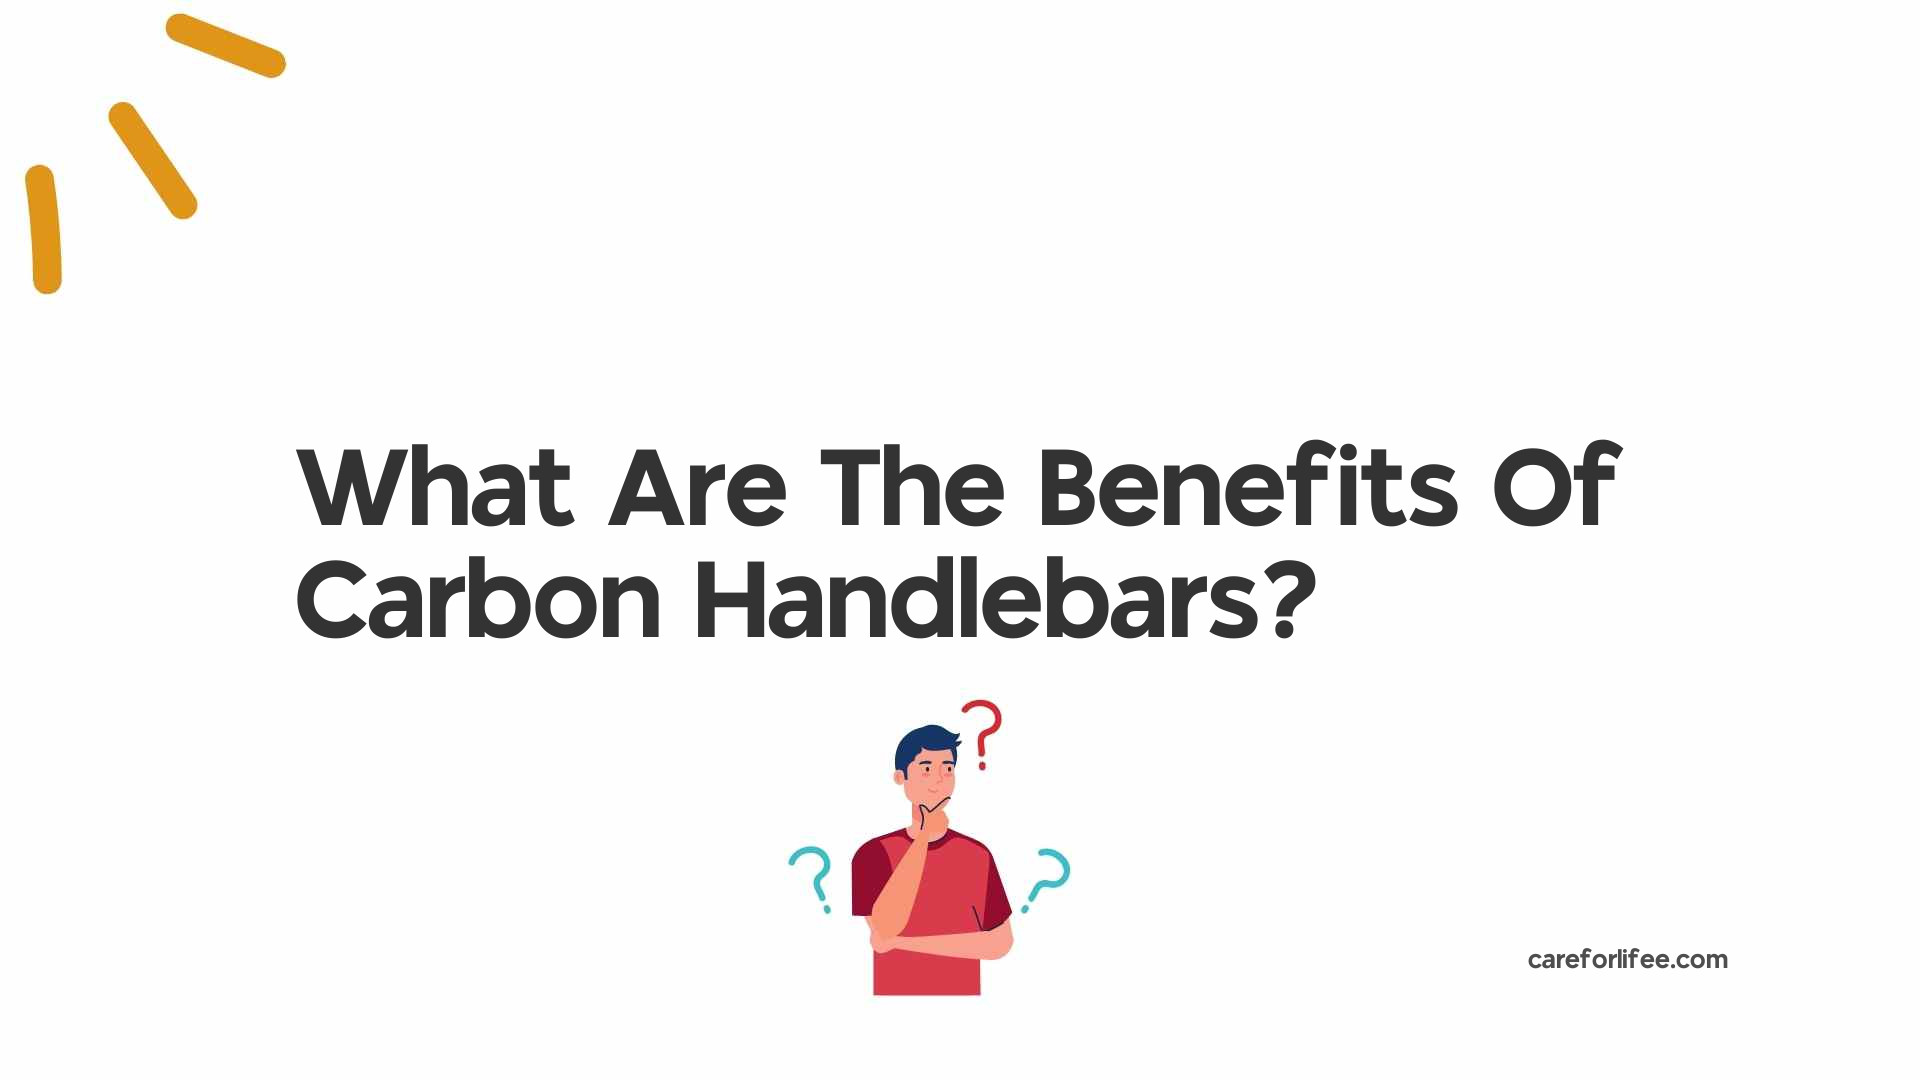 What Are The Benefits Of Carbon Handlebars?